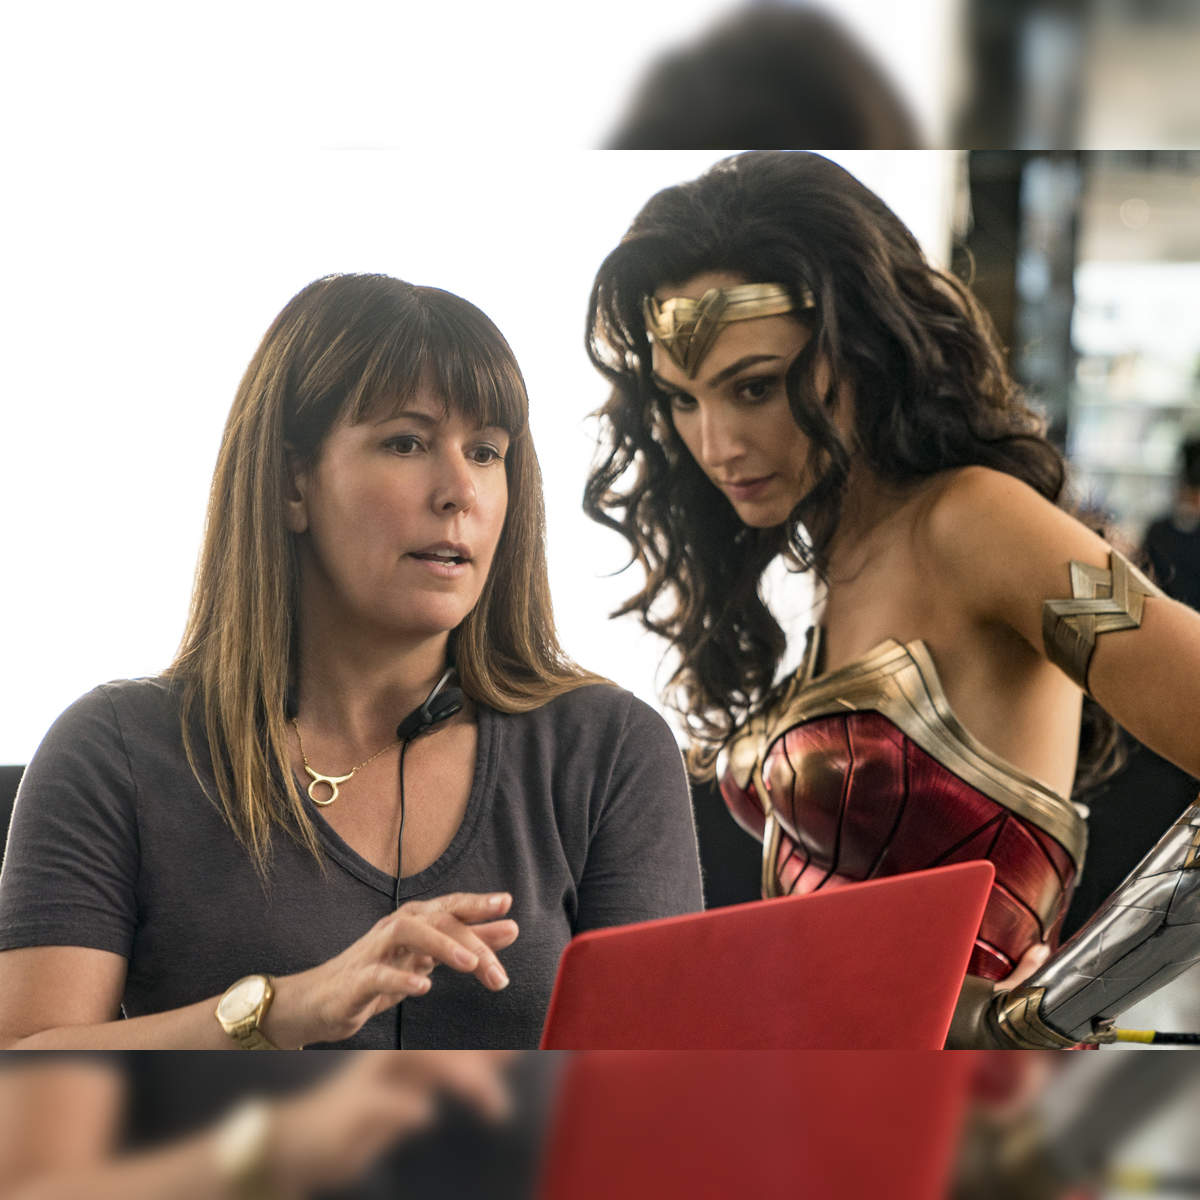 Wonder Woman 3 Ft Gal Gadot Might Not Happen As Director Patty Jenkins  Depicts Harsh Reality